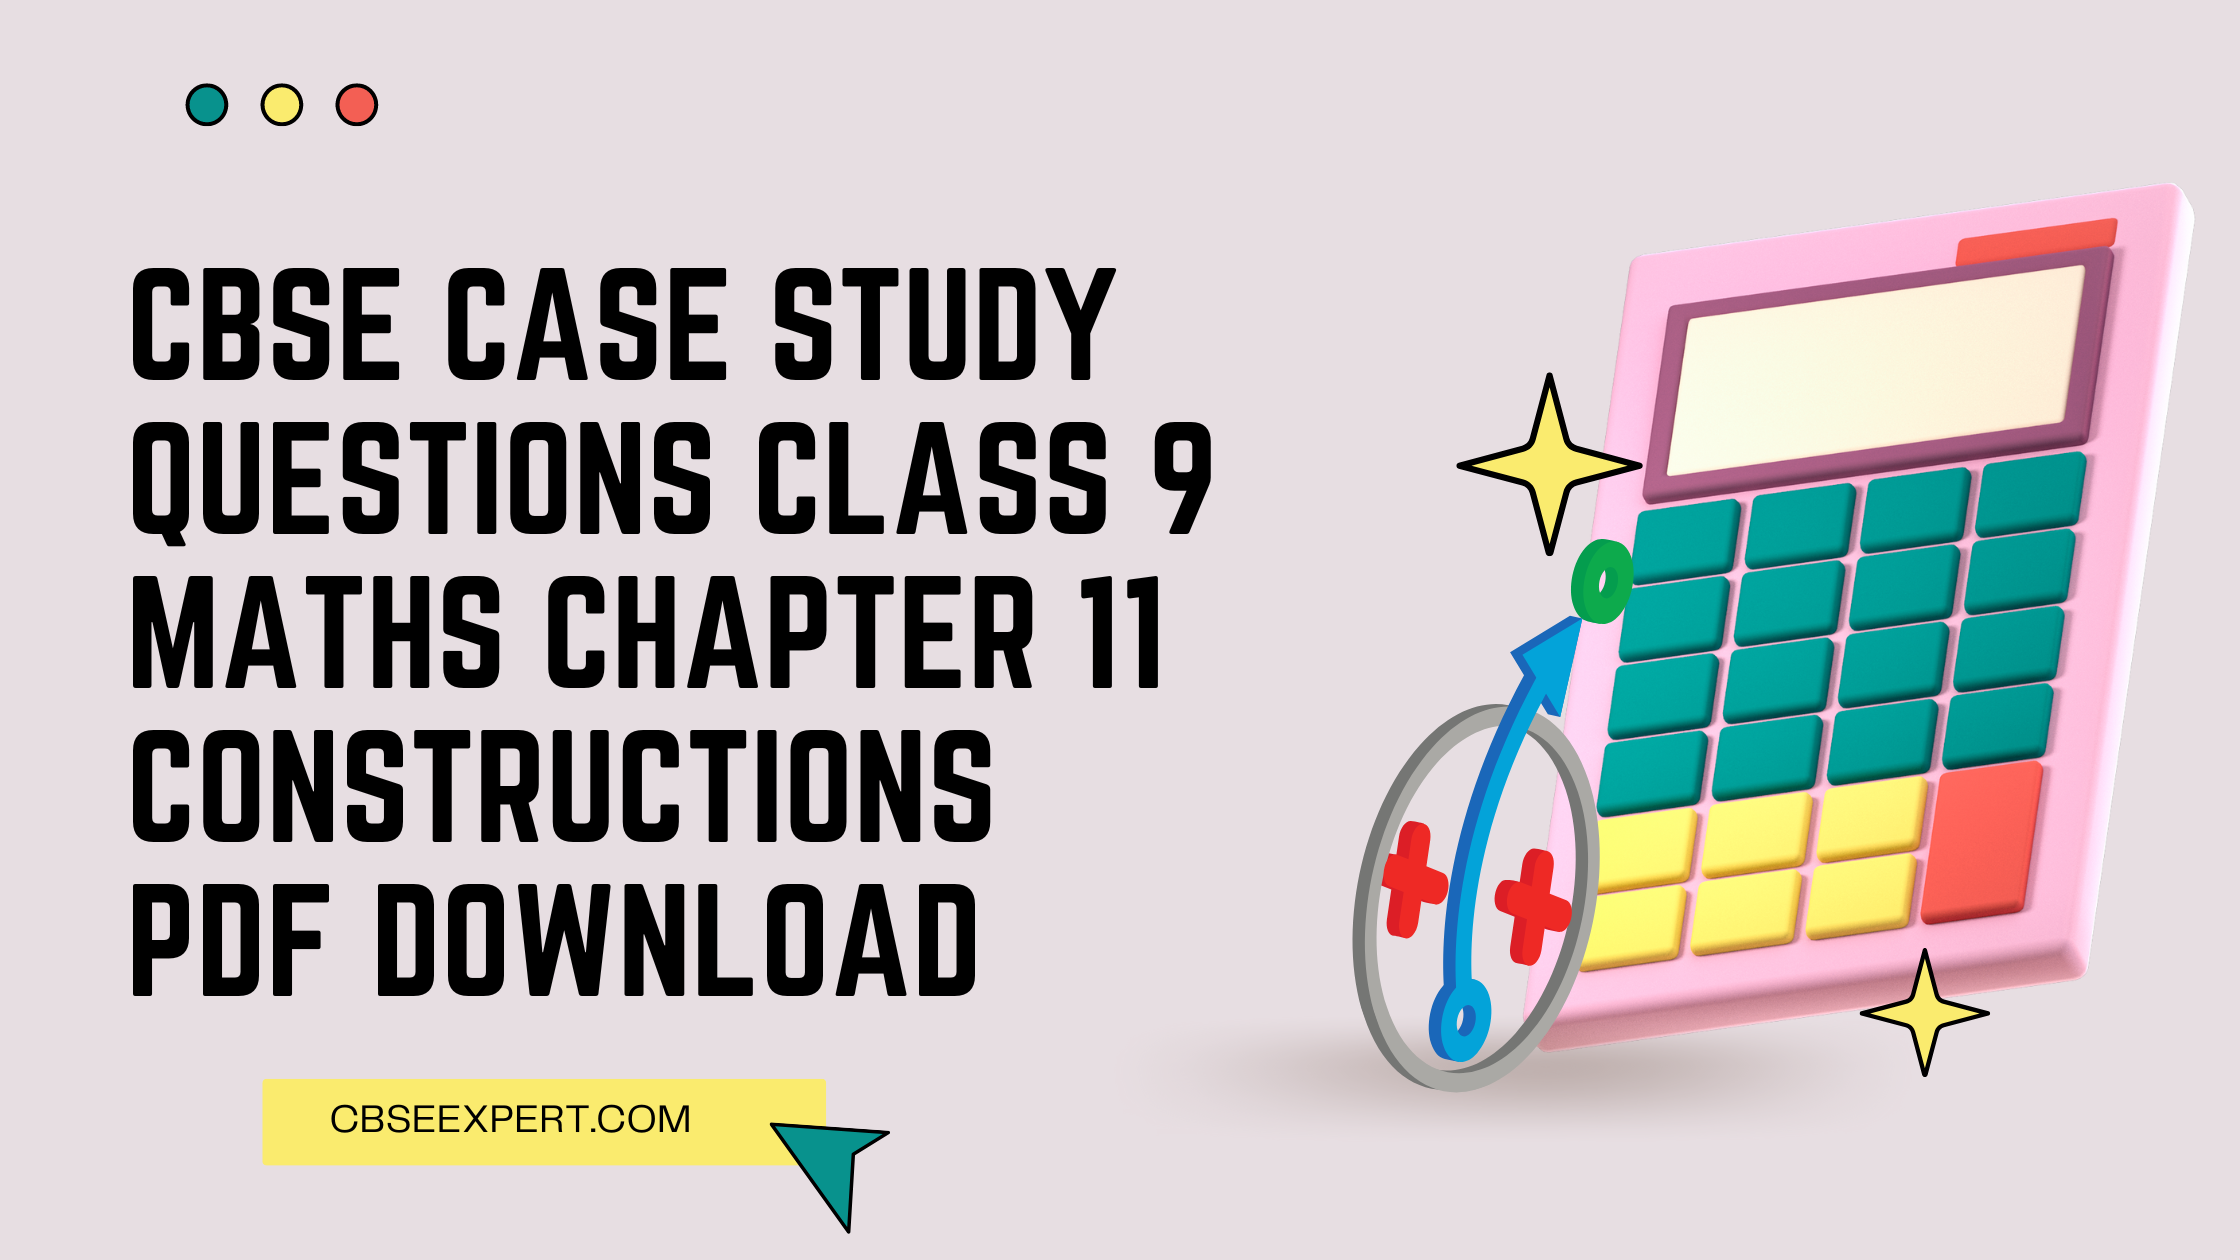 CBSE Case Study Questions Class 9 Maths Chapter 11 Constructions PDF Download